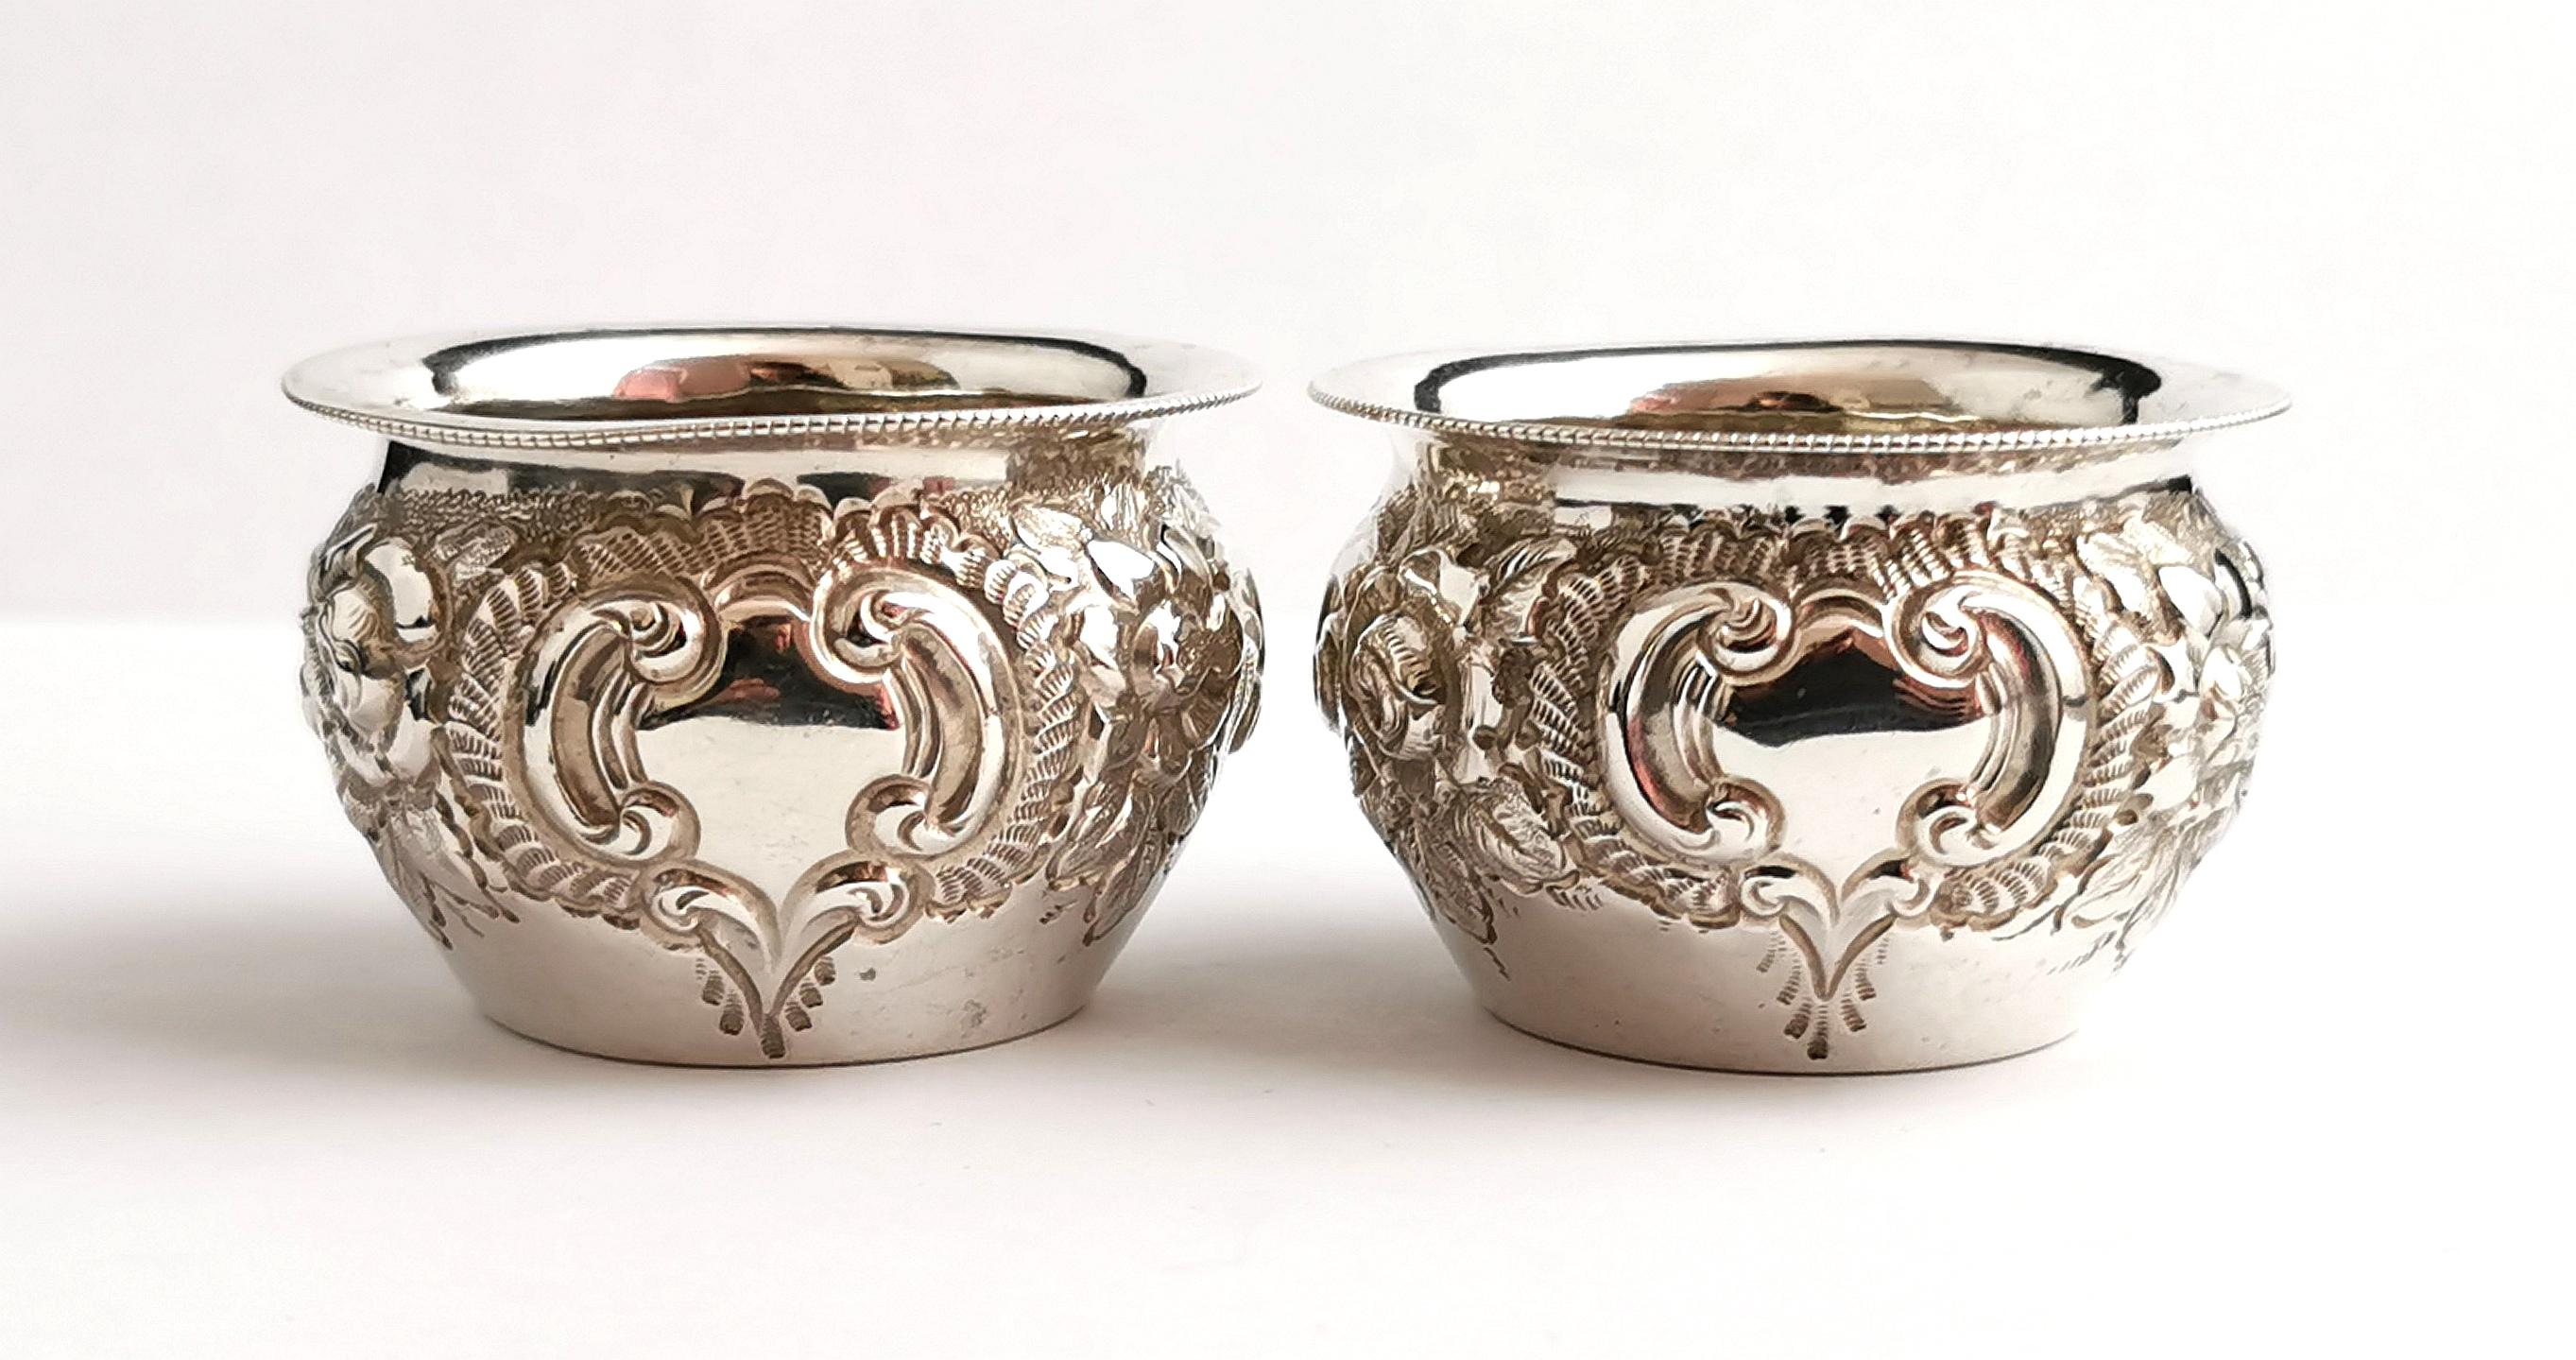 A beautiful and decorative pair of antique, Victorian era sterling silver salts.

They have a pretty repousse floral design each with a blank cartouche to the front which could be monogrammed if desired.

No liners or spoons.

They are fully